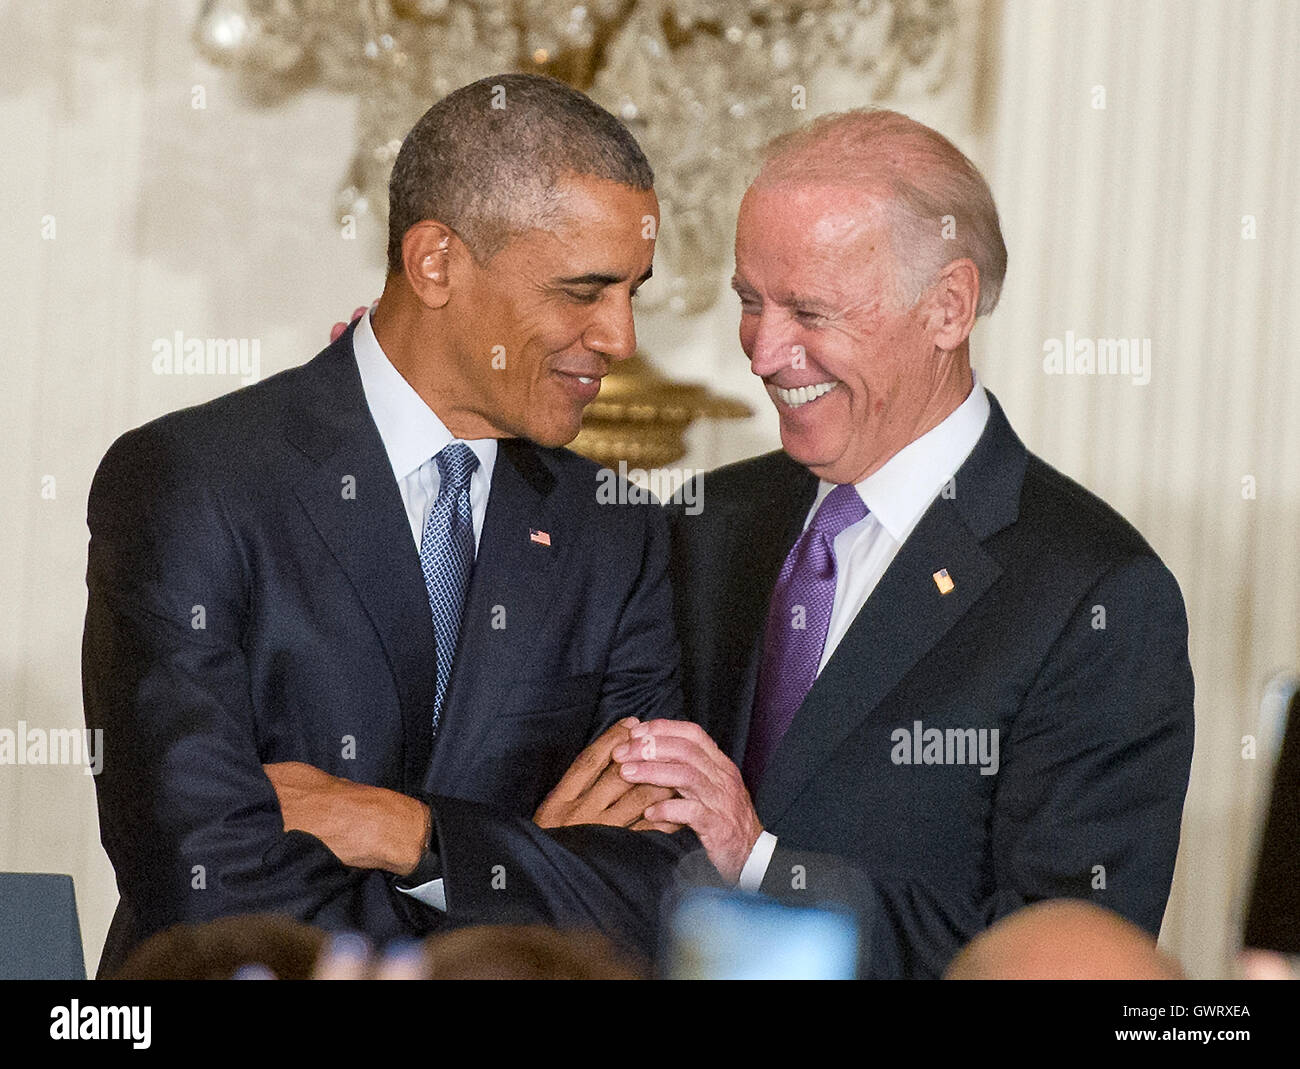 United States President Barack Obama, left, and US Vice President Joe Biden, right, share smiles as the President is introduced prior to his making remarks at a reception for the 25th Anniversary of the White House Initiative on Educational Excellence for Stock Photo